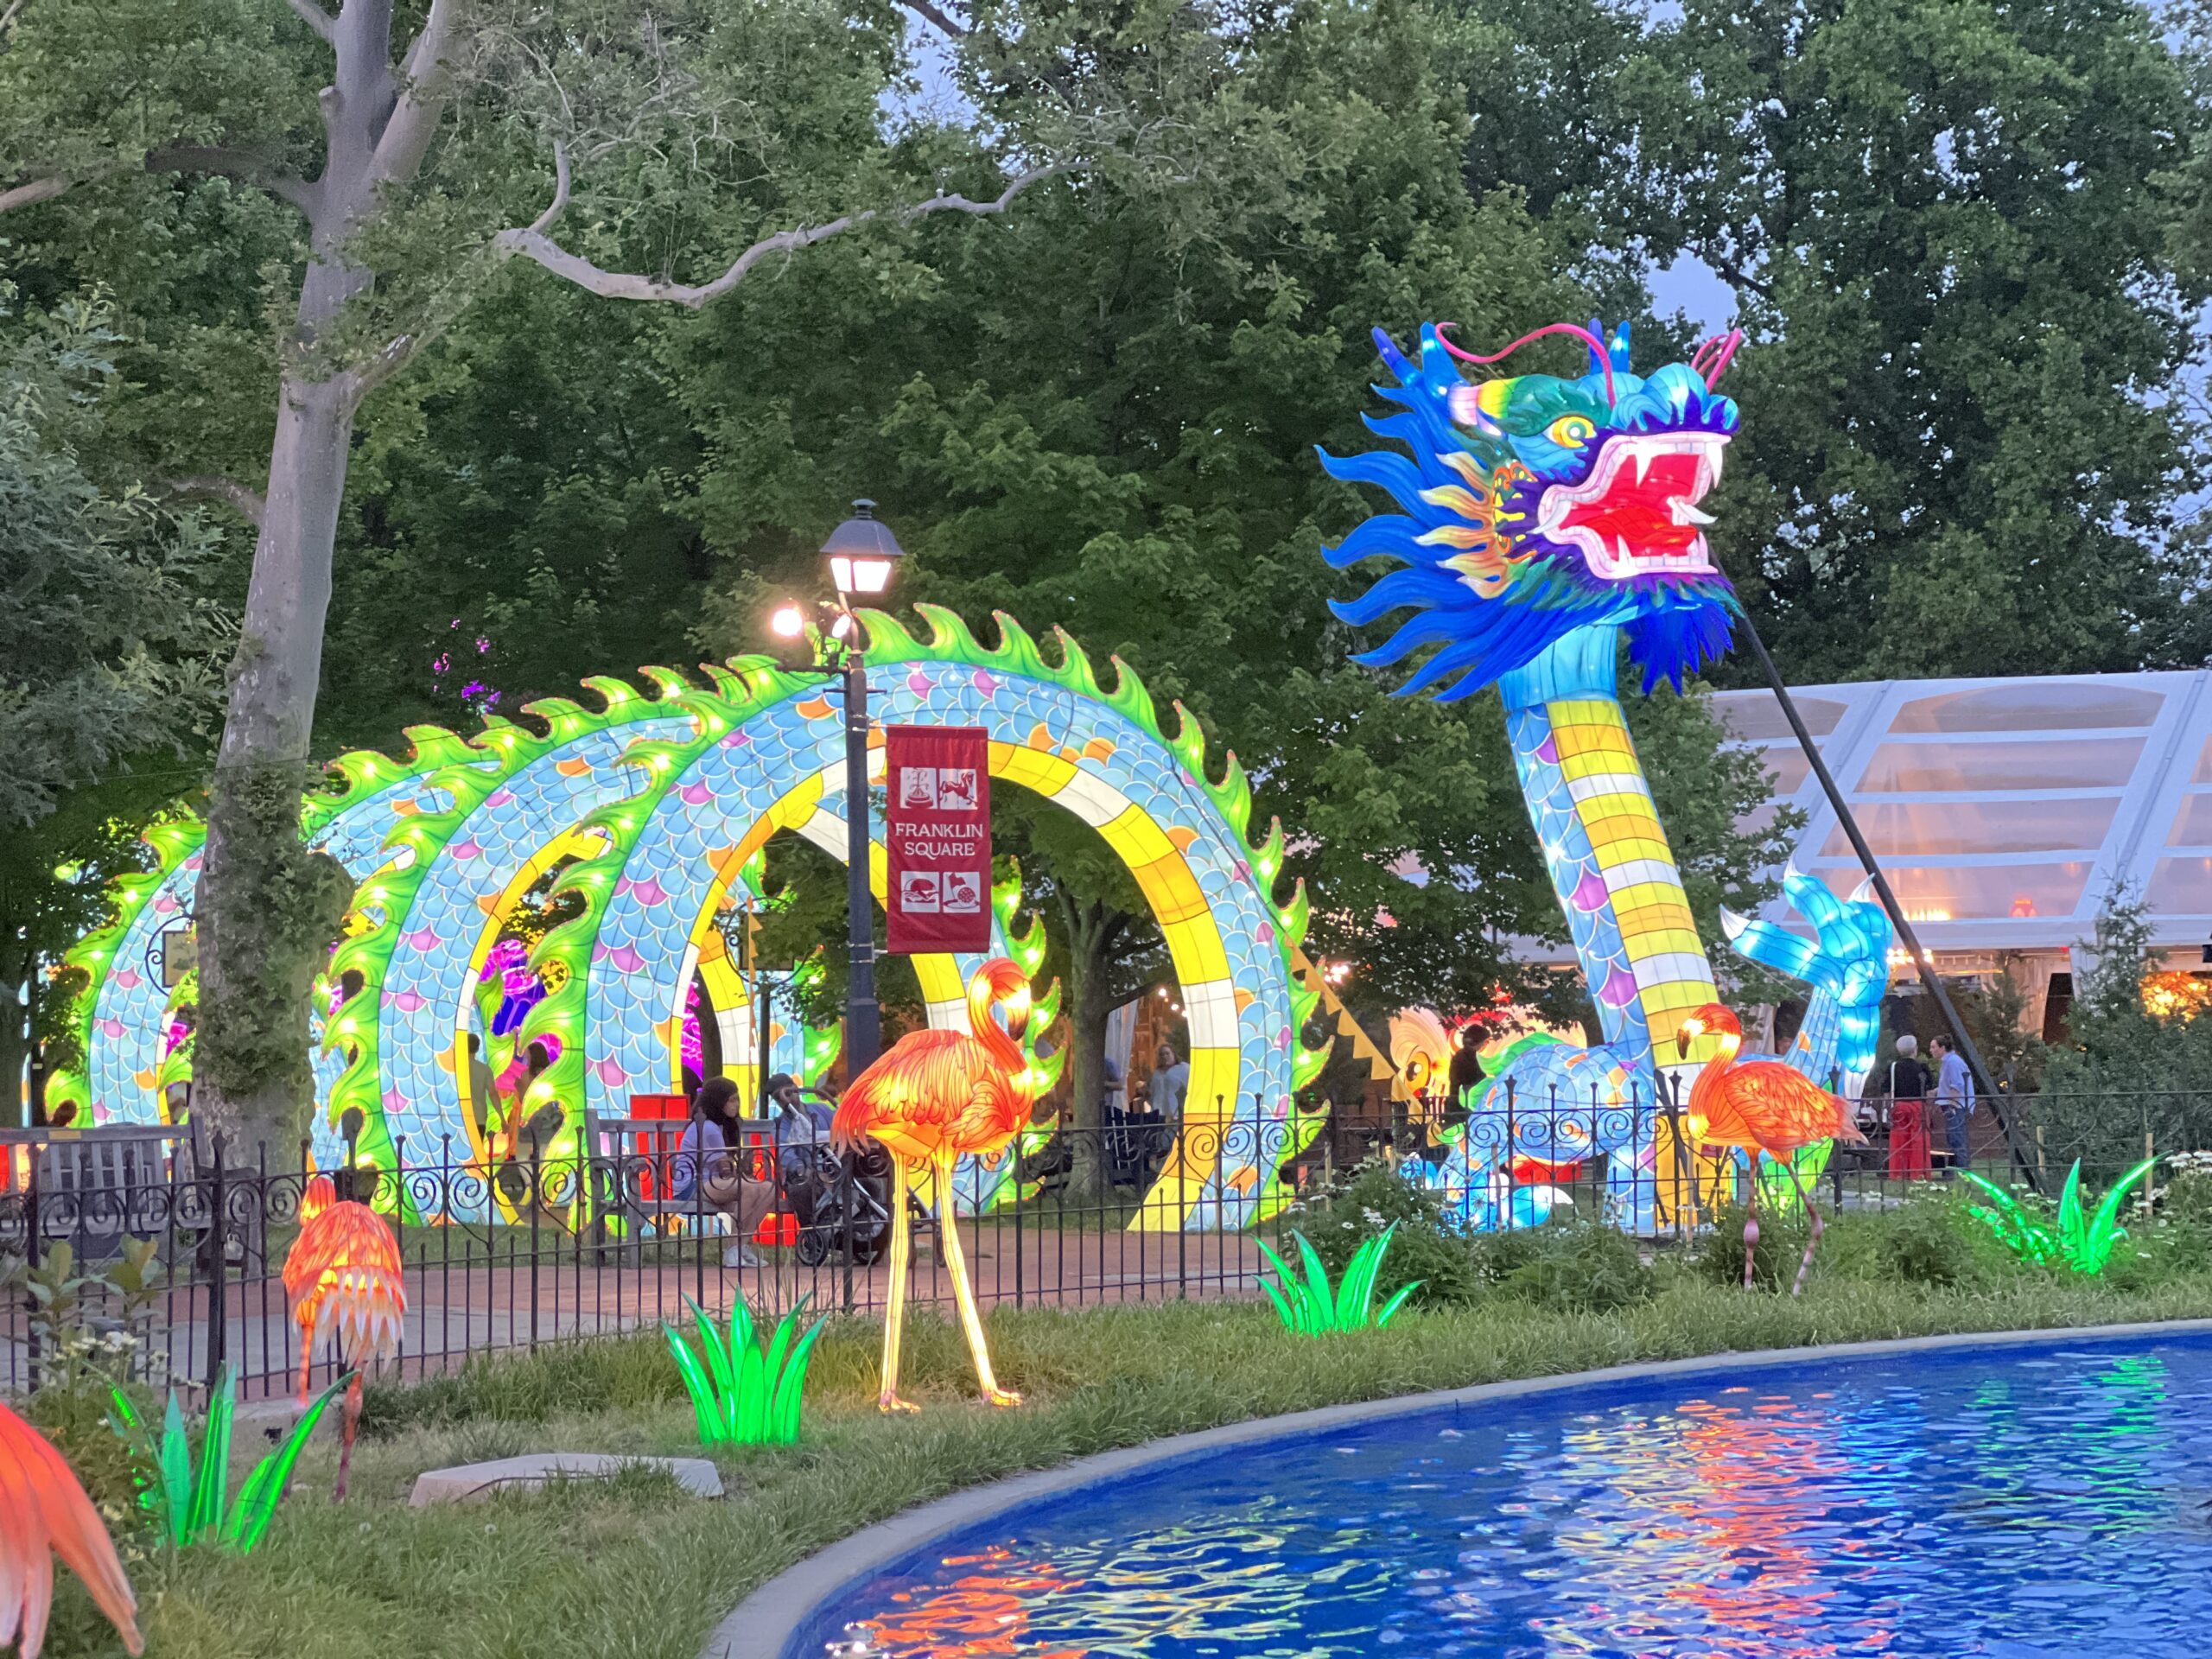 Rendell Family Fountain with Sea Dragon Tunnel and flamingos at Philadelphia Chinese Lantern Festival at dusk WIDE